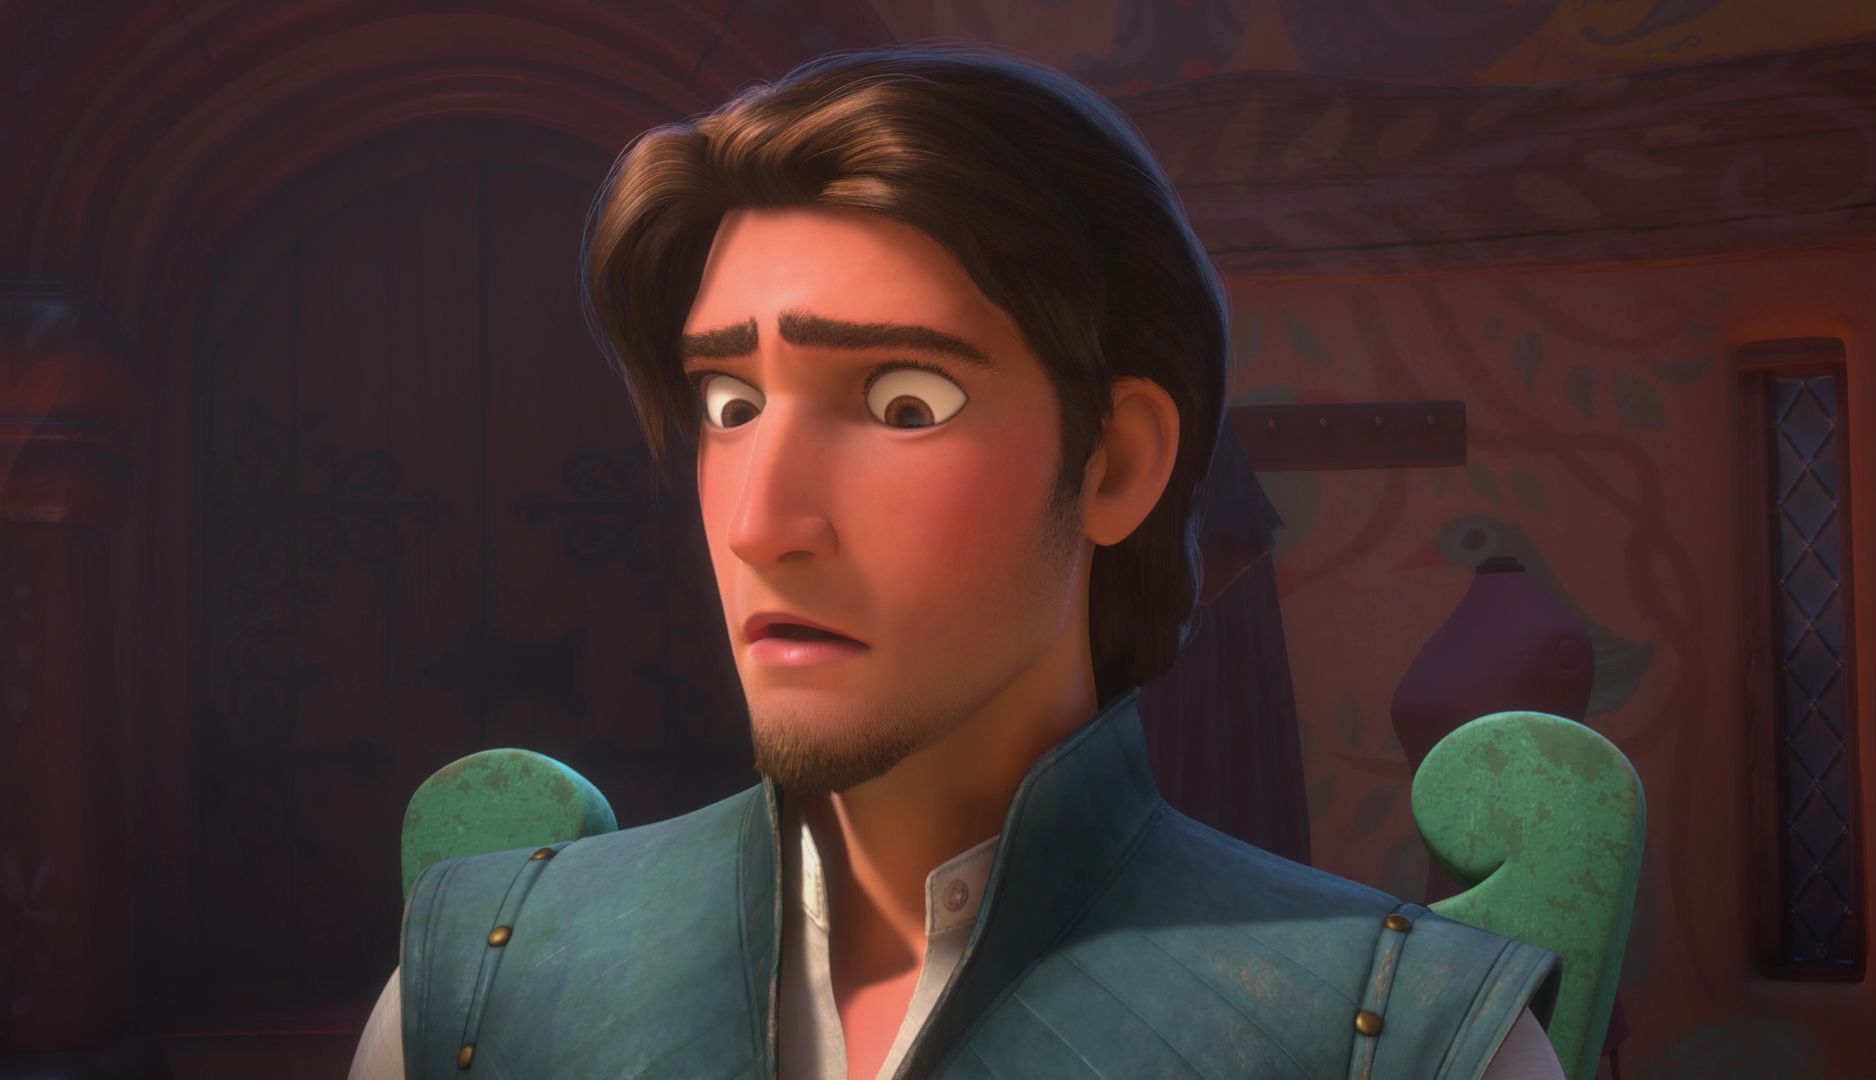 Tangled Images on Fanpop.